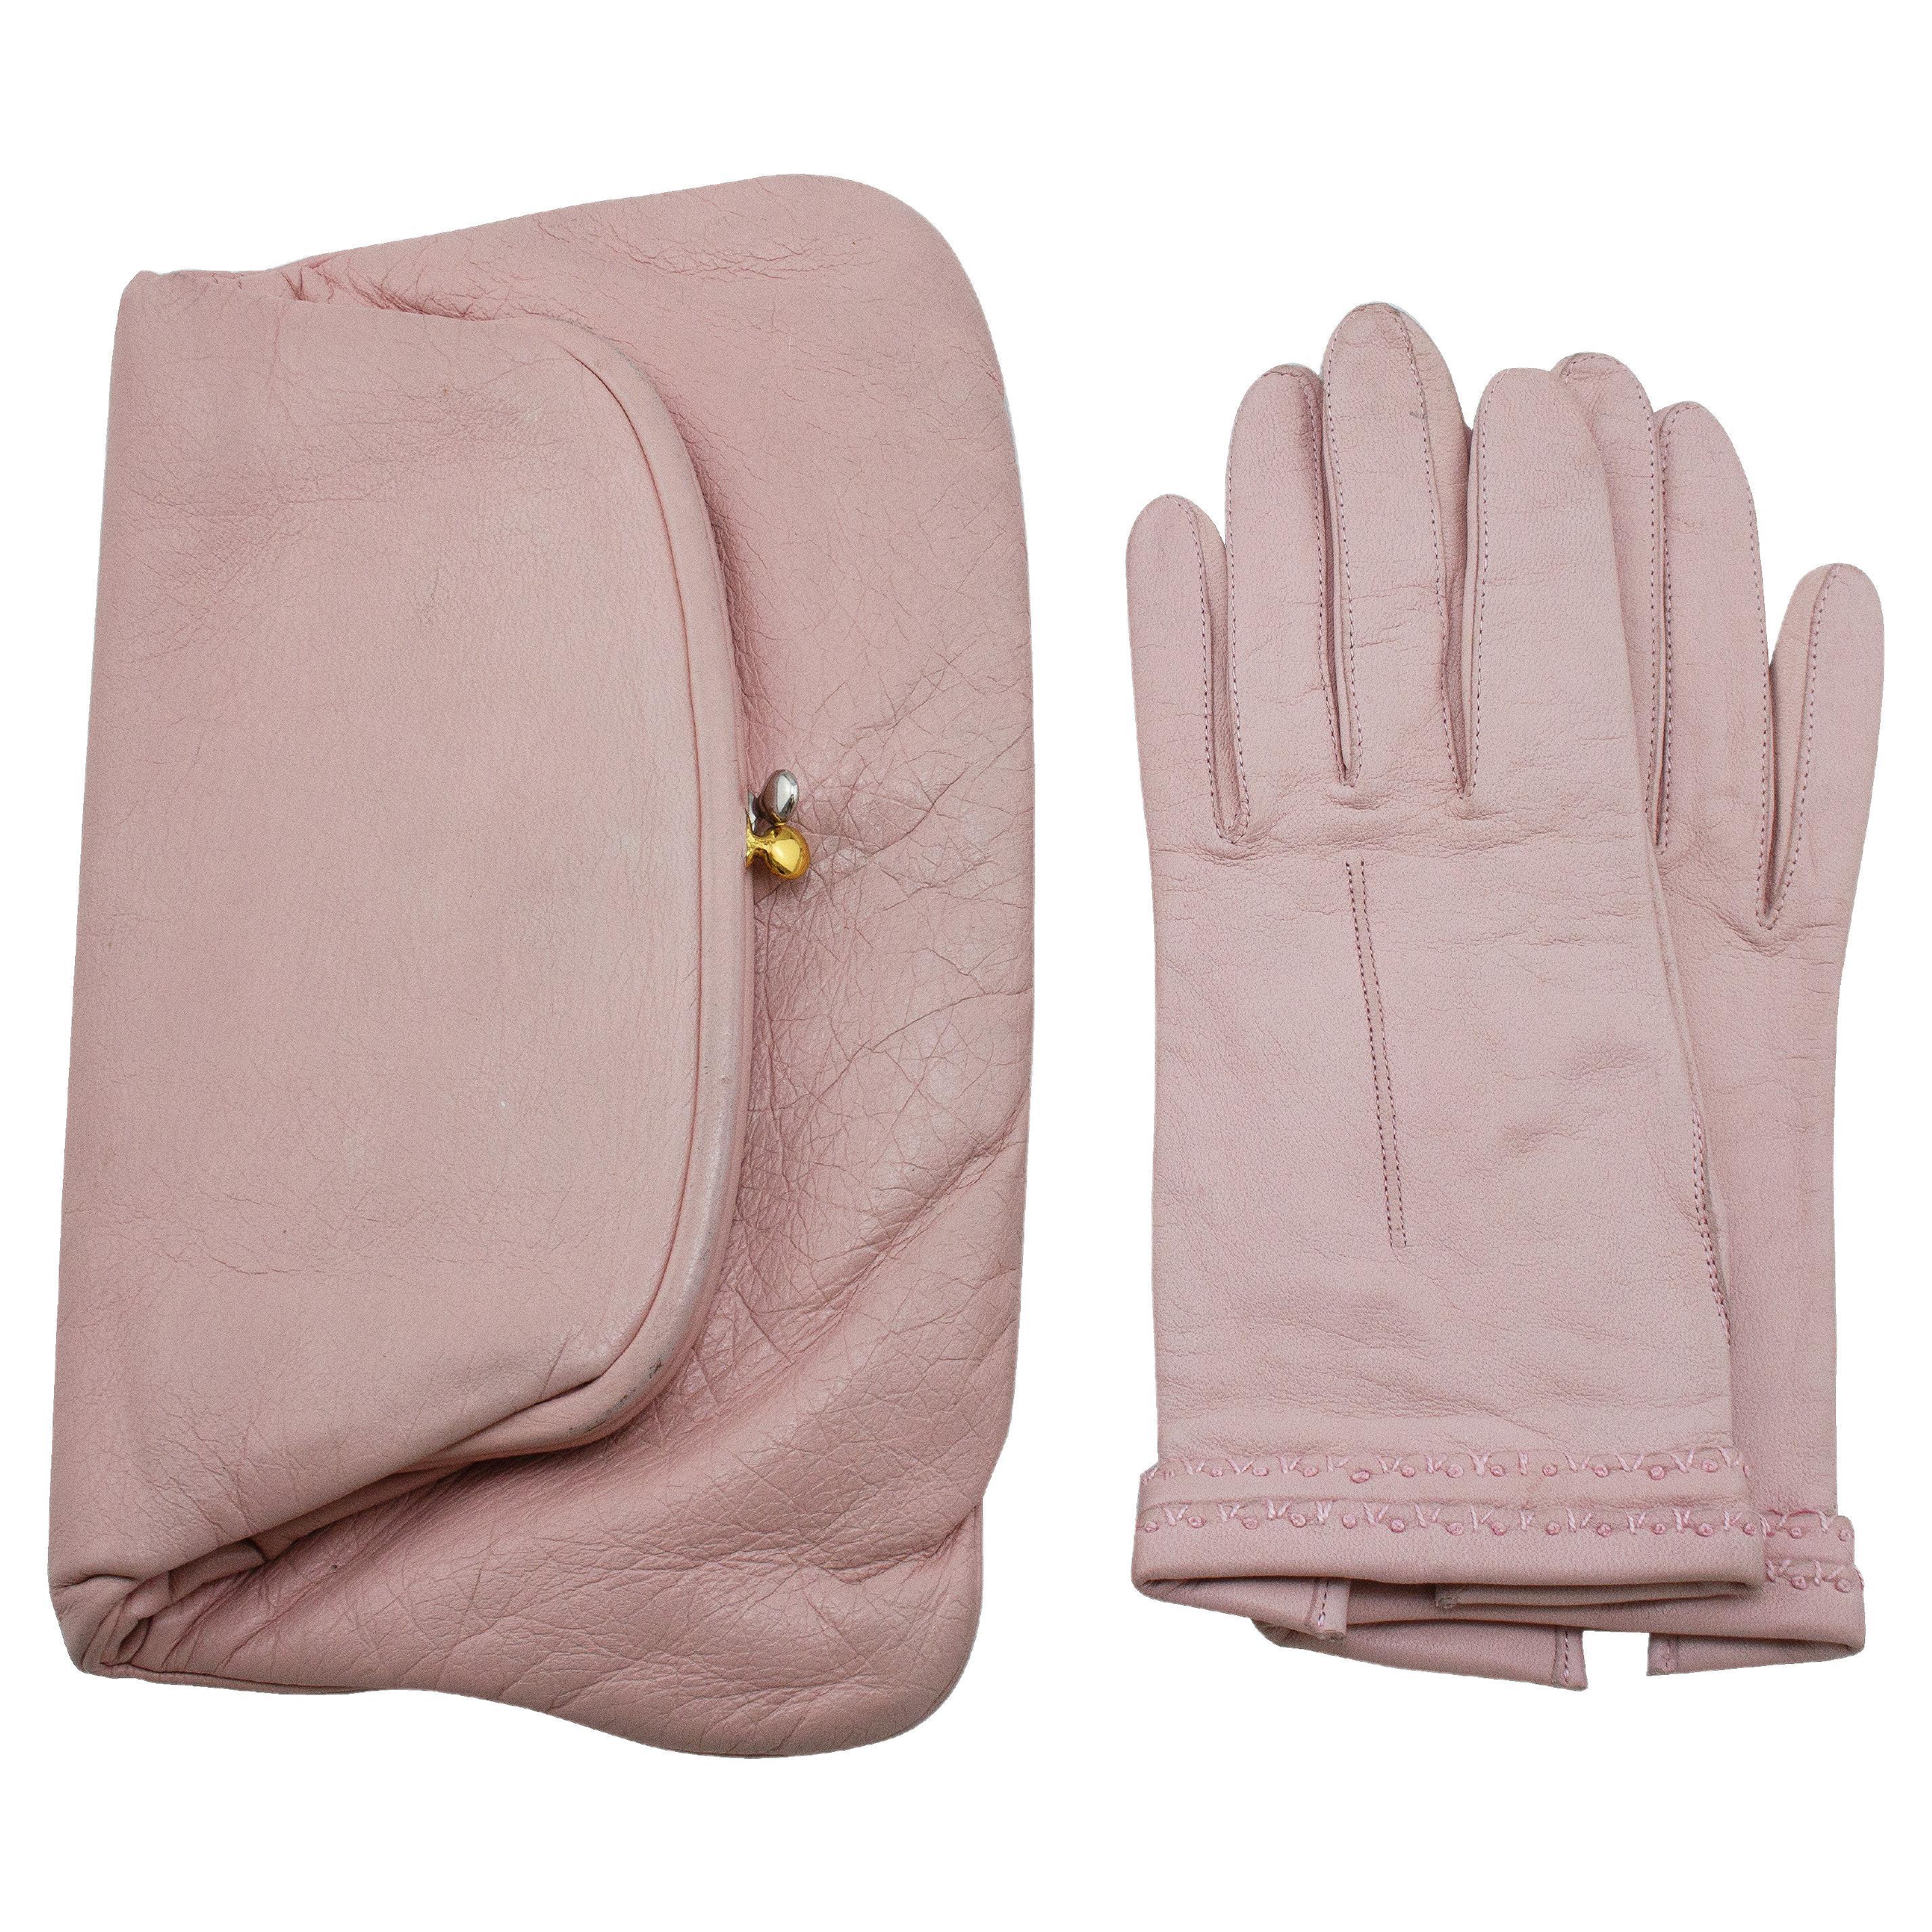 1950's Coblentz Pink Leather Clutch with Matching Kid Gloves